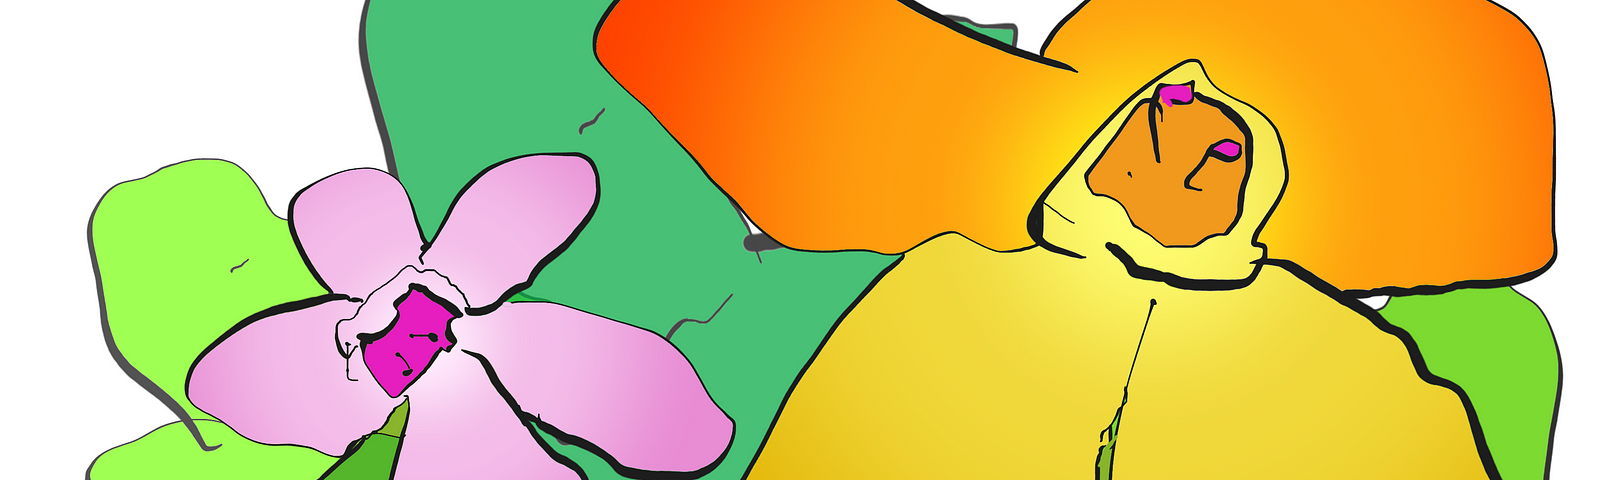 Semi-abstract cartoon of two flowers, one yellow and orange, one pink and mauve, in front of loosely figurative blobs in shades of green. By Doodleslice 2024